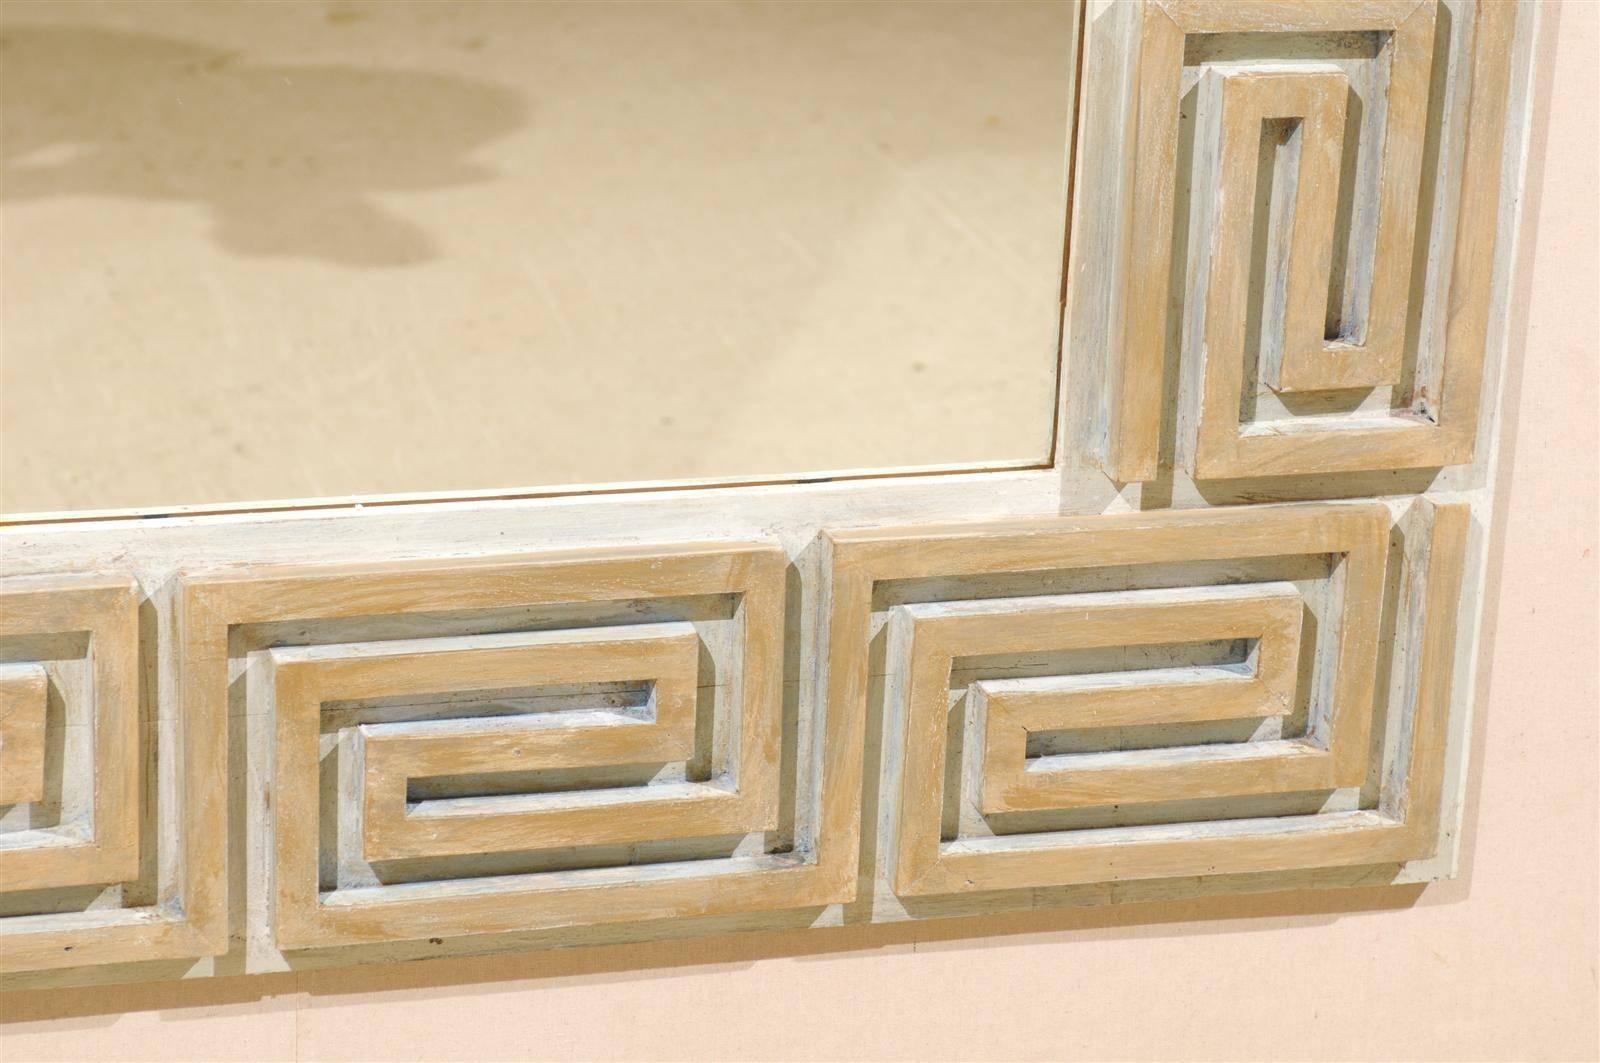 A Large Greek Key Painted Wood Mirror in Neutral Tan, Beige and Cream Color In Good Condition For Sale In Atlanta, GA